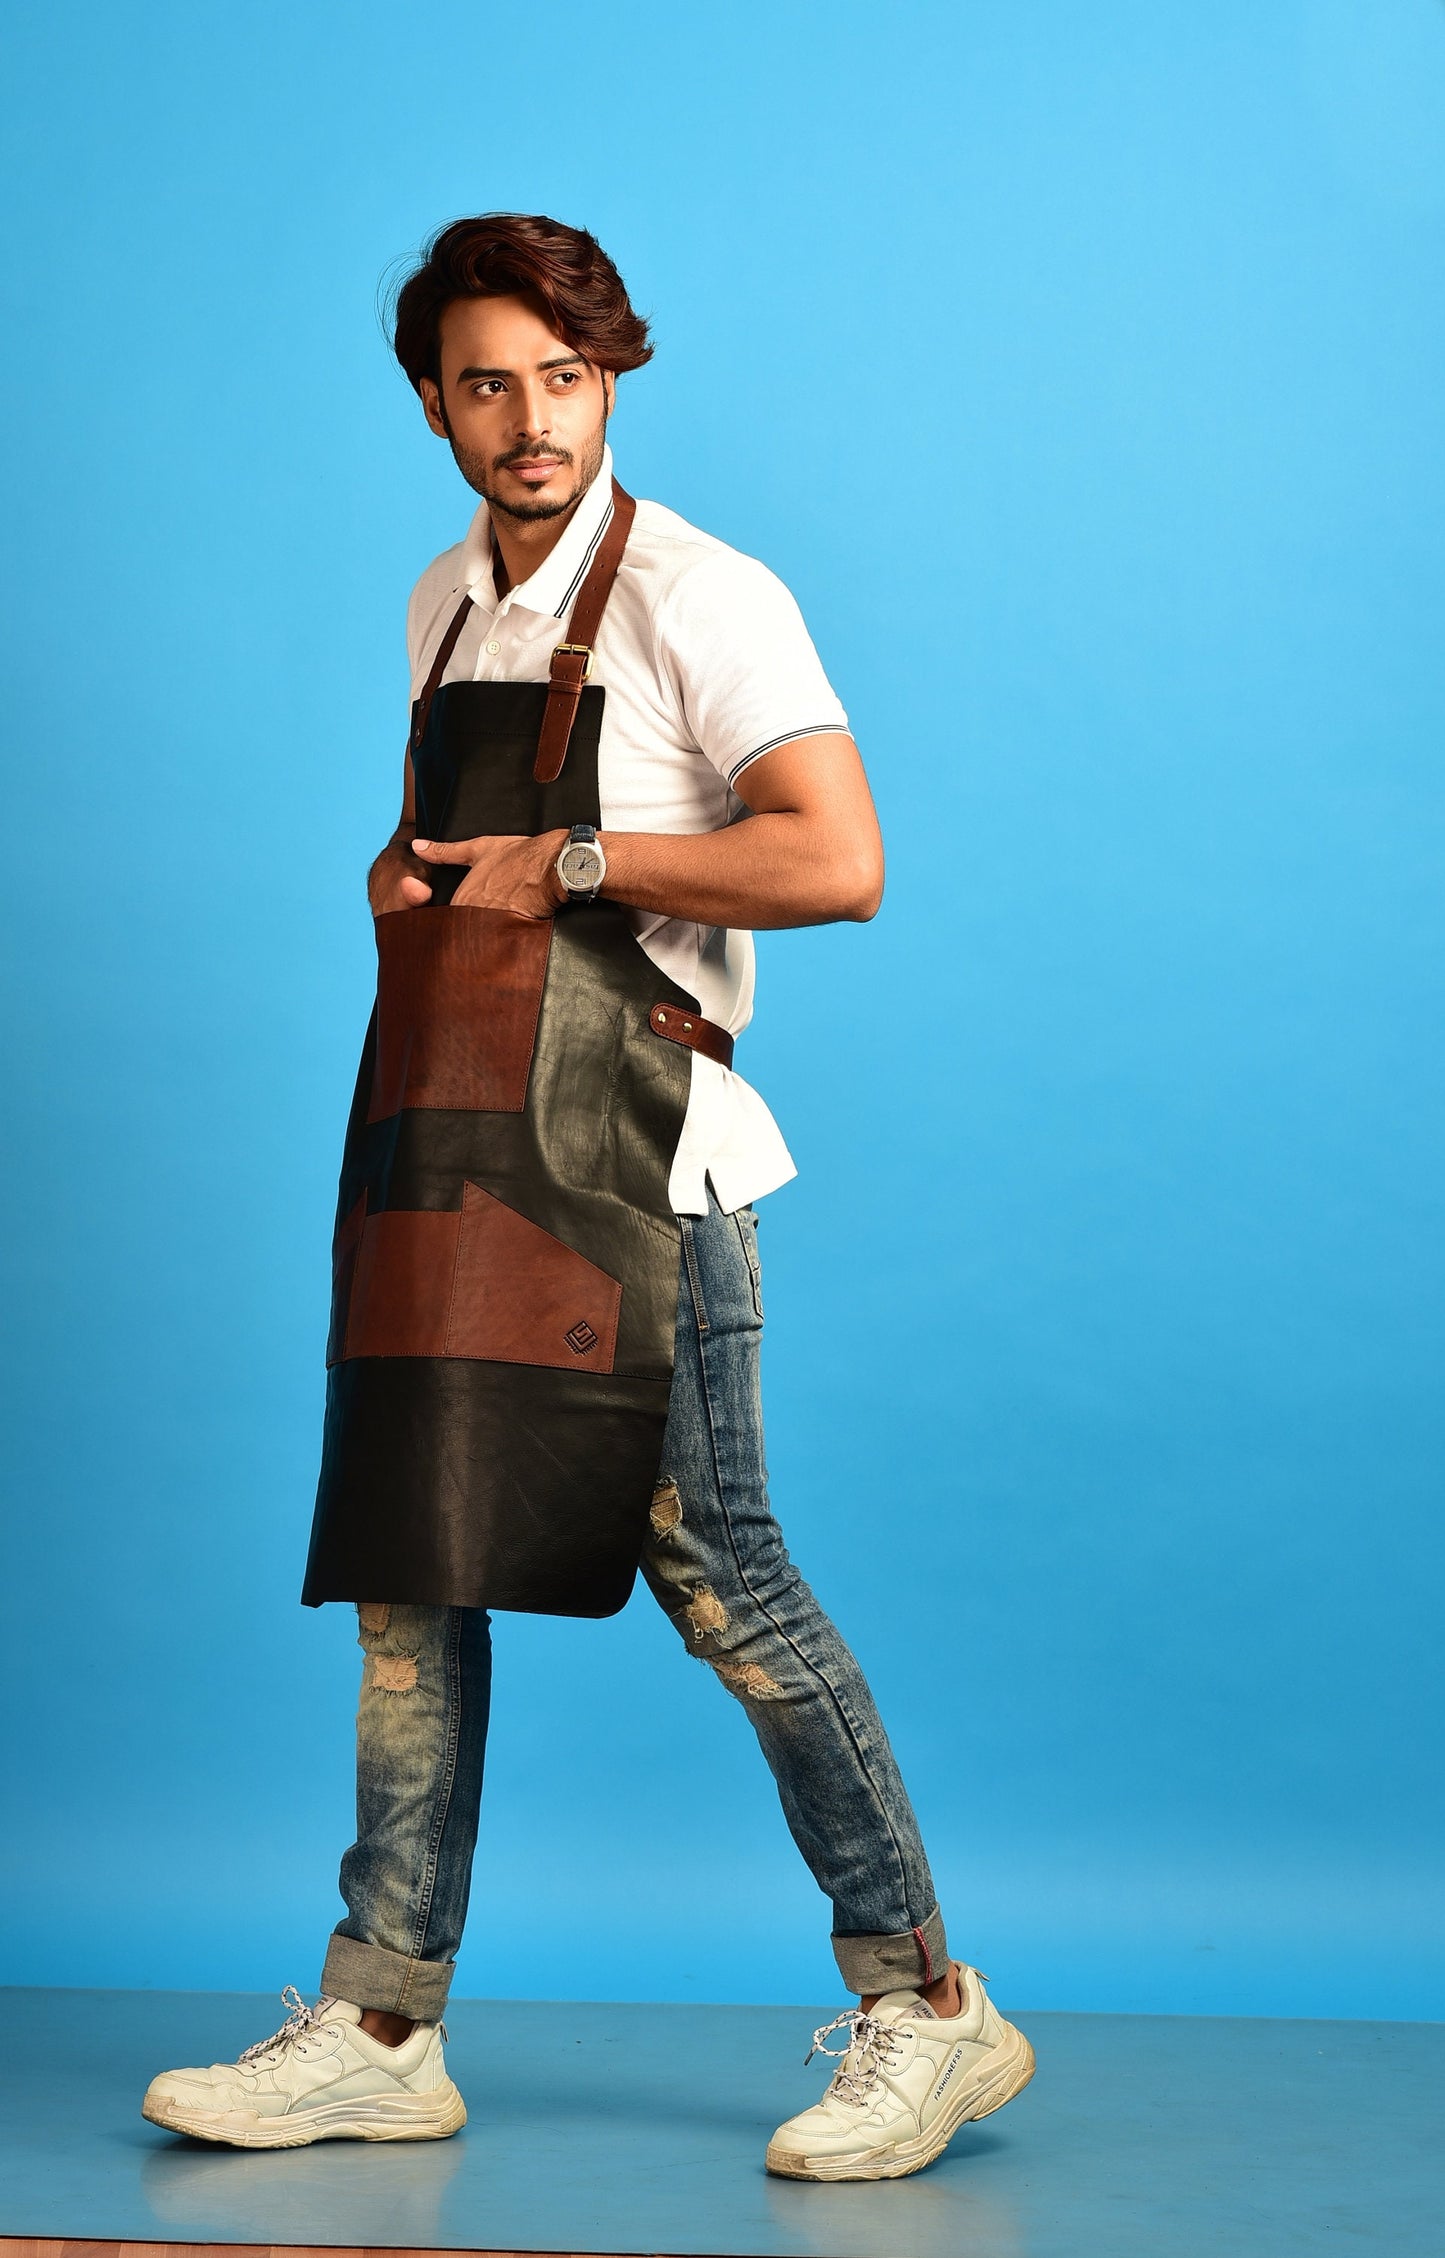 Handcrafted Apron Leather Apron for men Craft Apron, Apron for blacksmith Work apron Butcher apron Artisan apron Heavy Duty Leather Apron